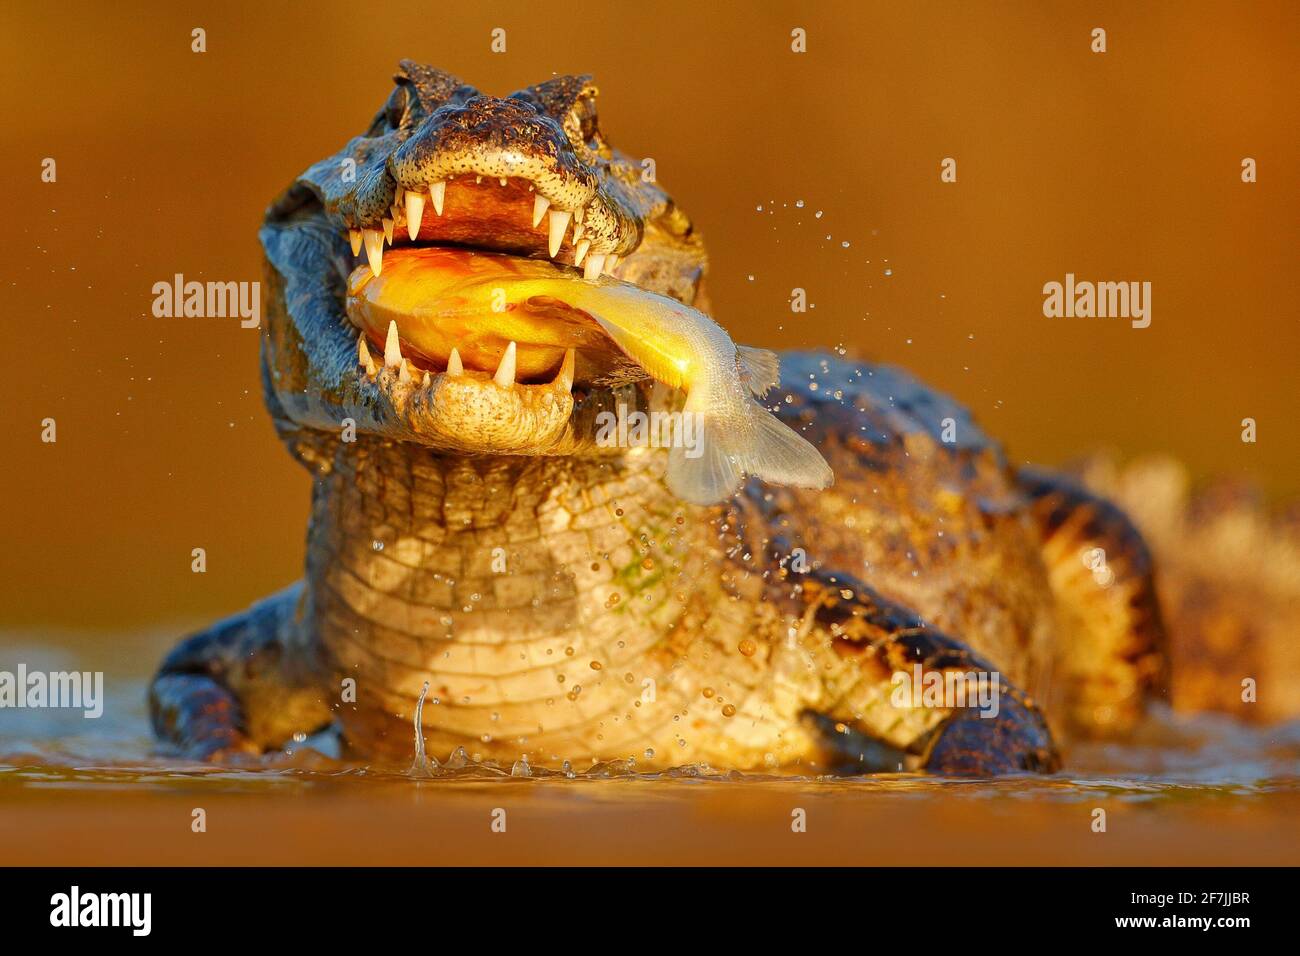 Crocodile catch fish in river water, evening light. Yacare Caiman,  crocodile with piranha in open muzzle with big teeth, Pantanal, Brazil.  Detail port Stock Photo - Alamy